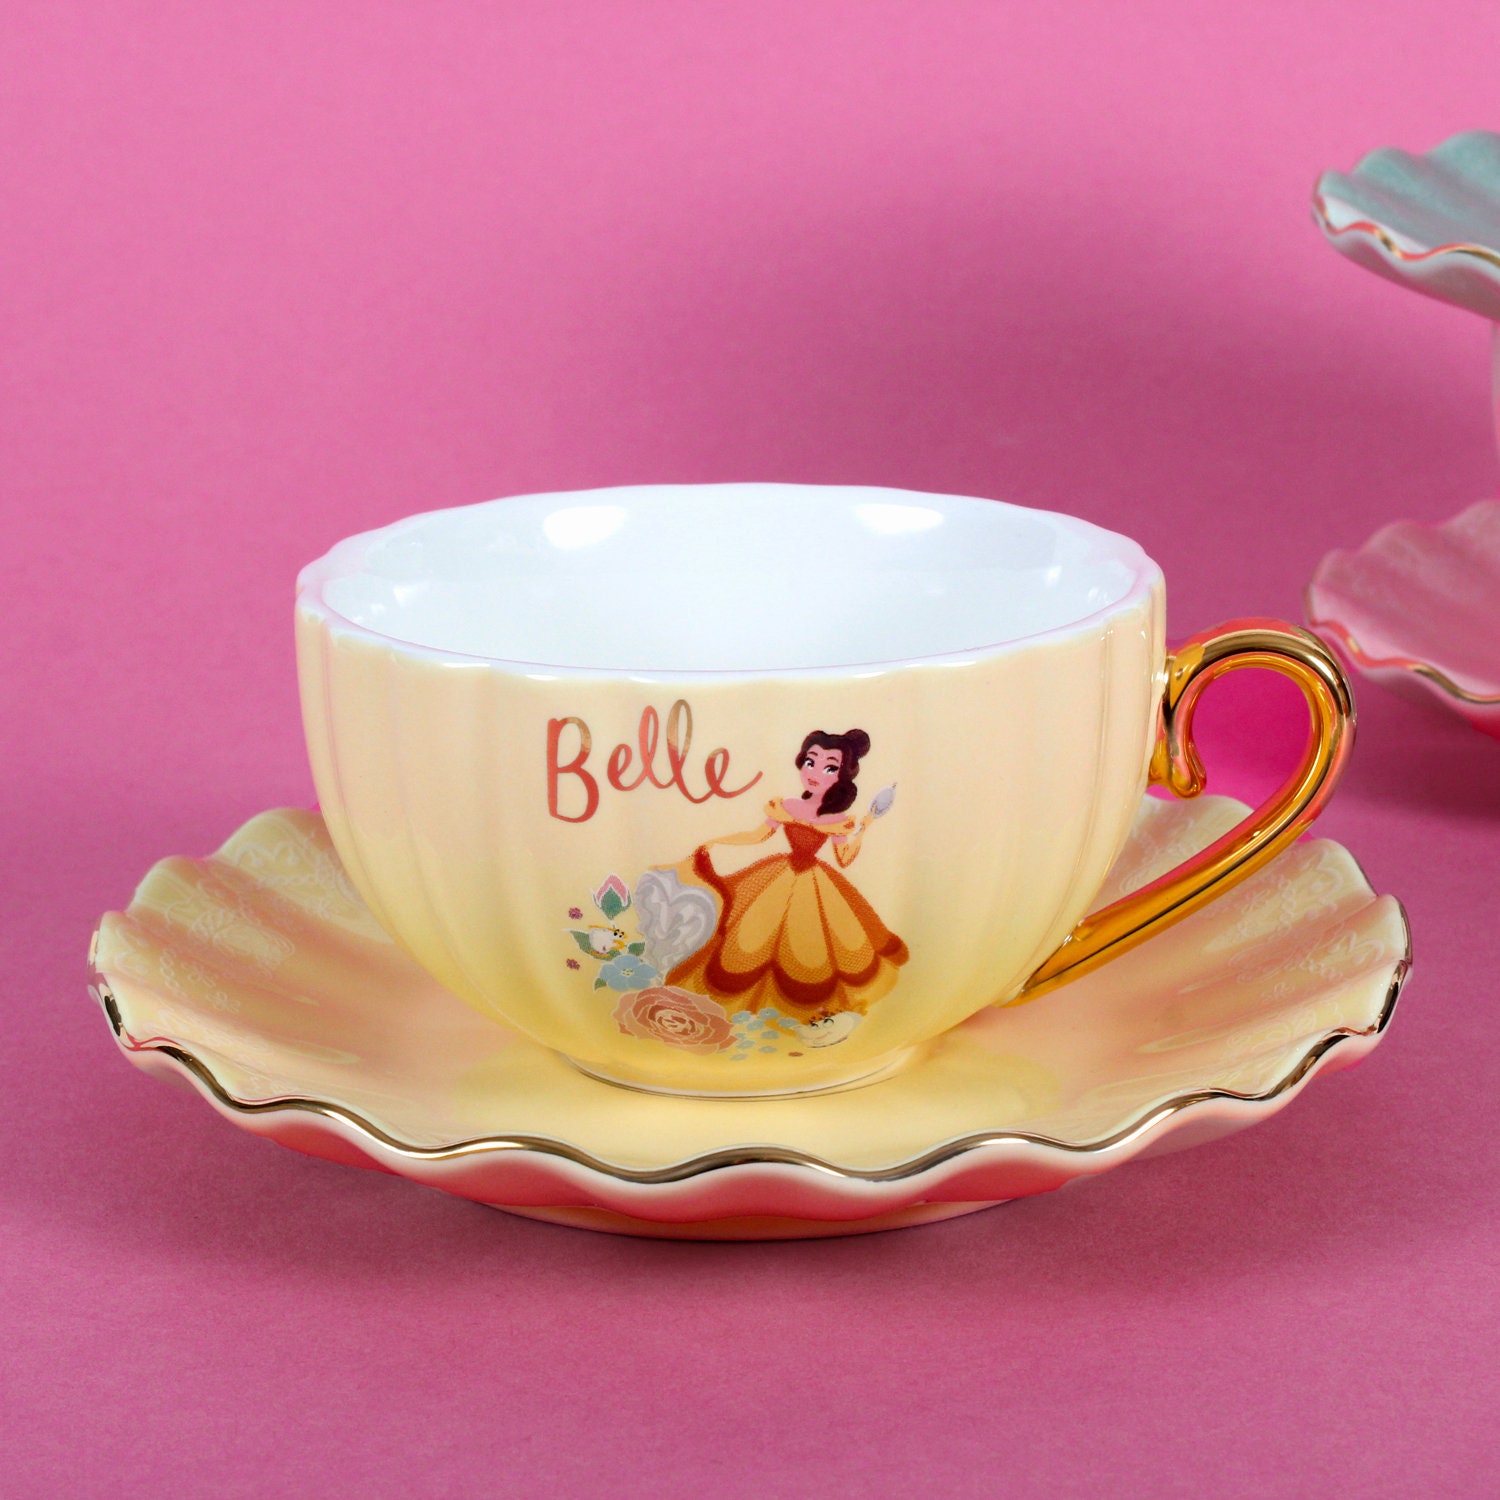 Buy Anime Tea Cup Online In India  Etsy India